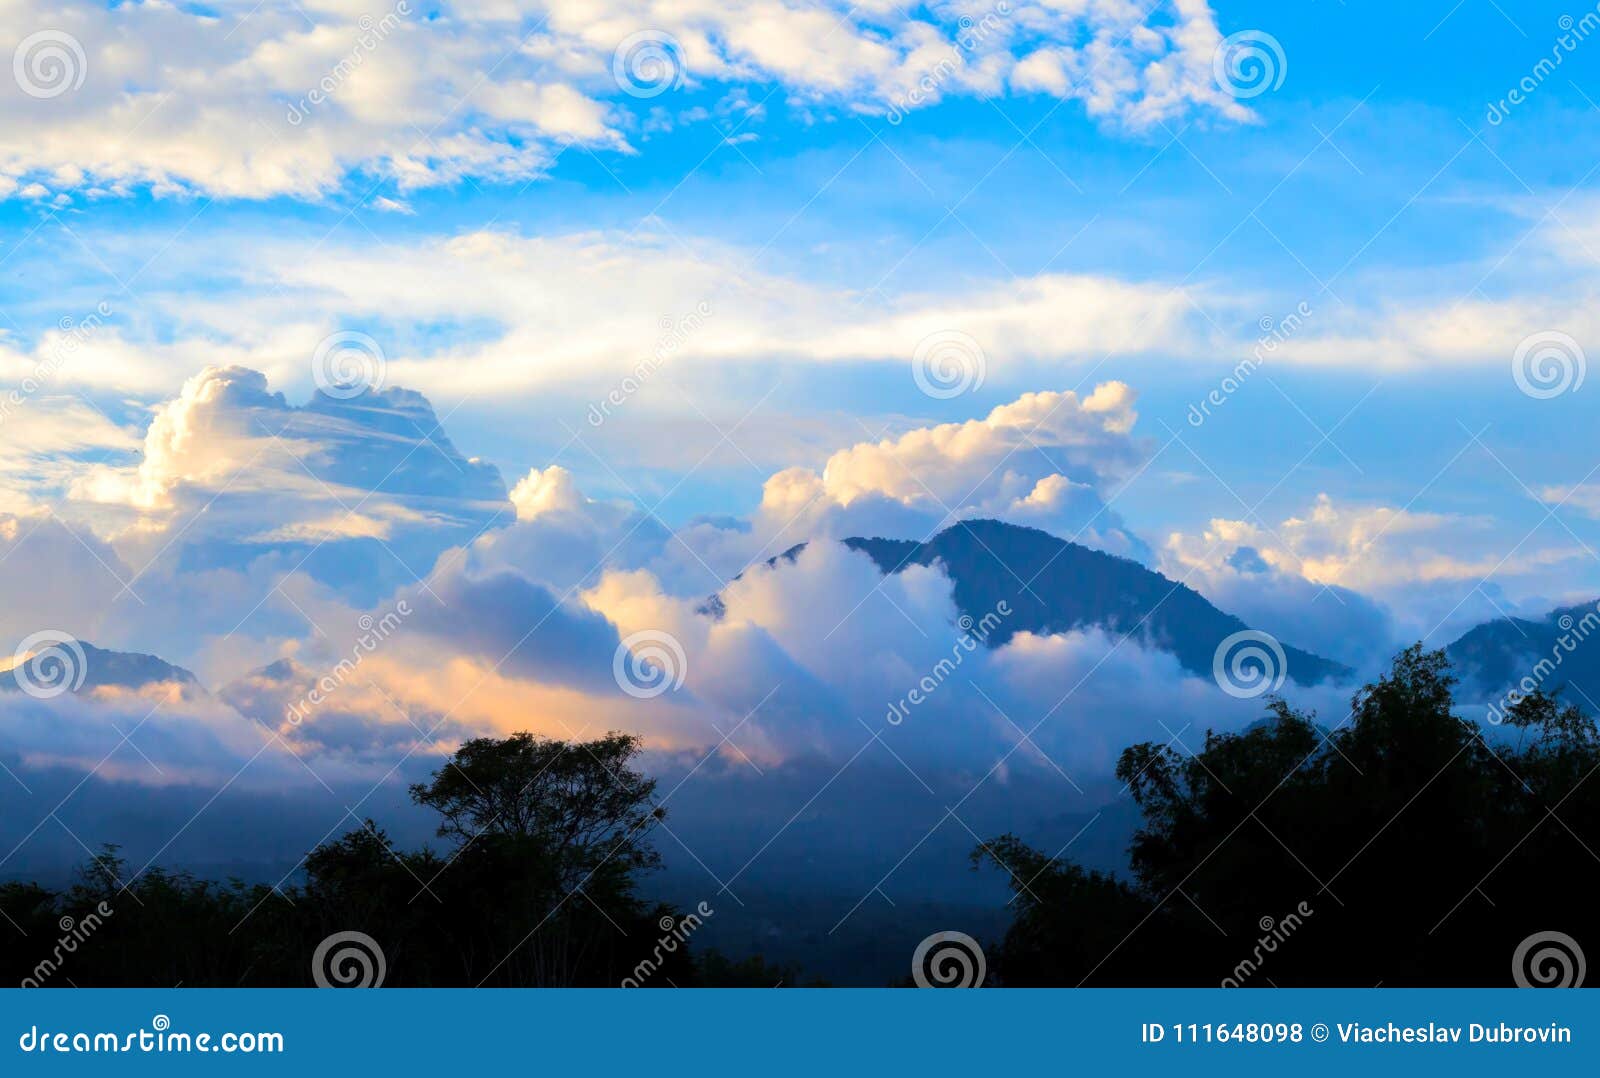 Spectacular Sunset In Mountains Tropical Golden Hour Landscape Stock